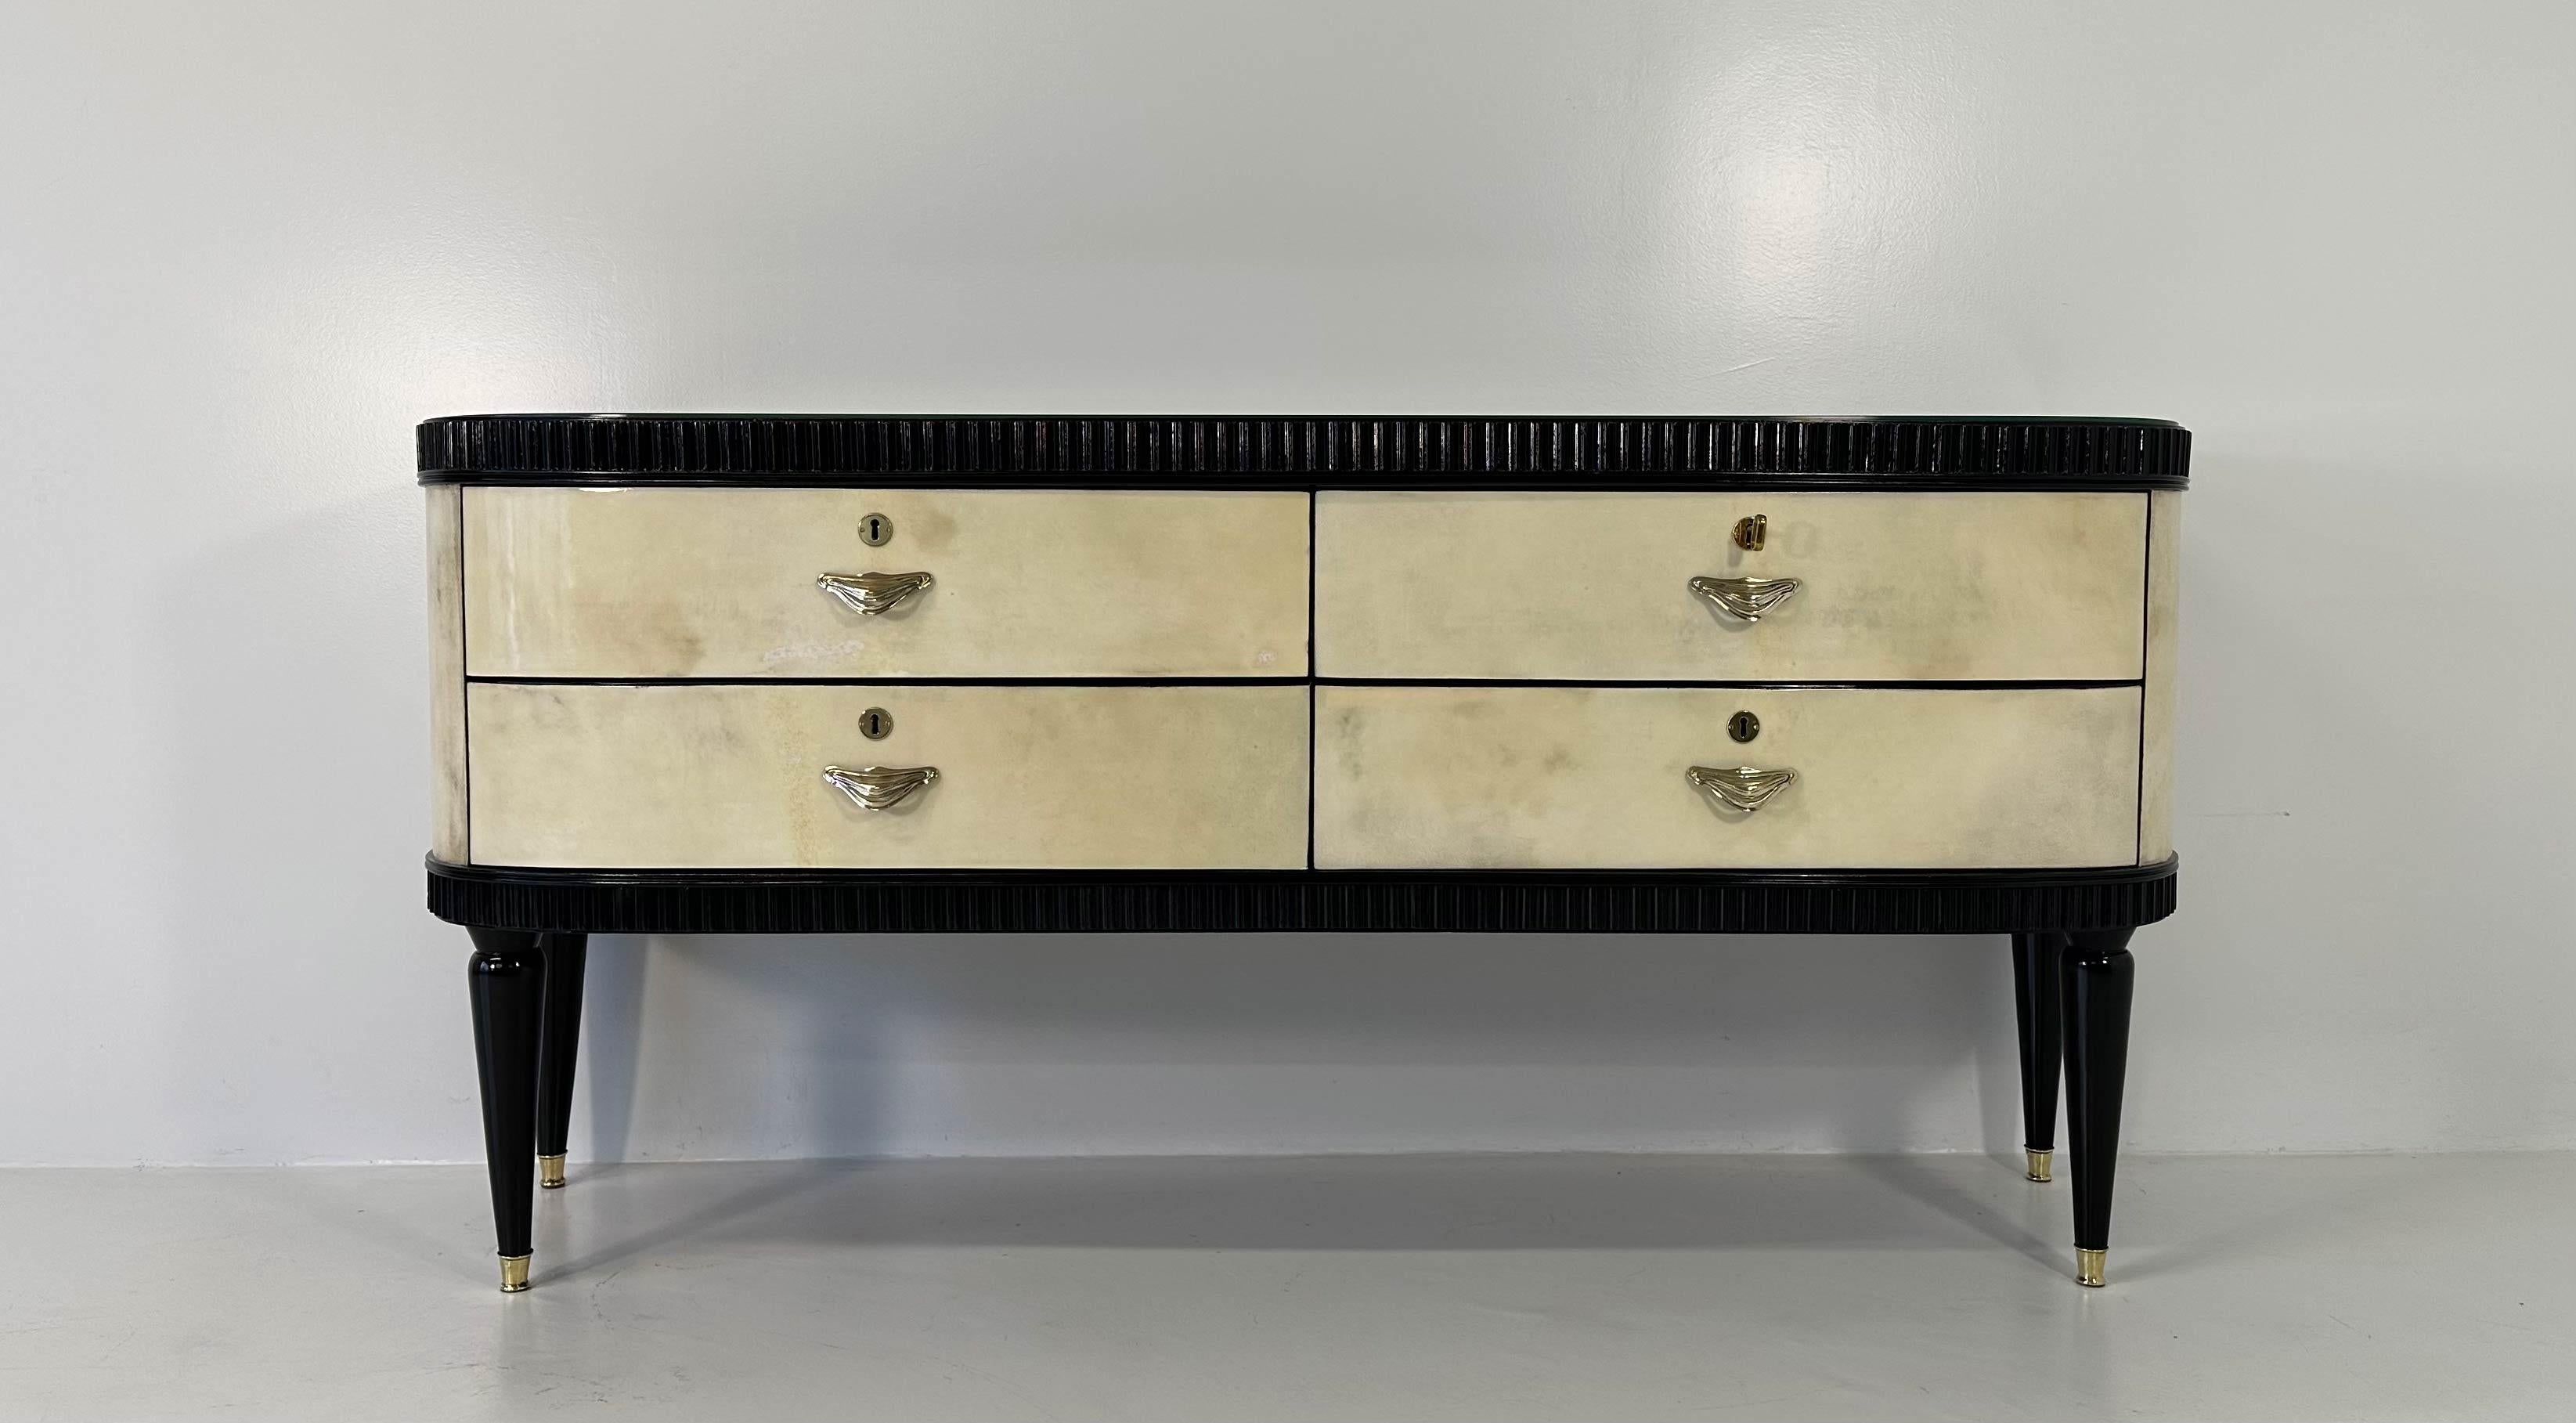 This elegant Art Deco dresser was produced in Italy, more precisely in Cantù, which is a small city in the north of Italy that used to be famous in the Art Deco era for wood crafting and furniture making. It was produced in the 1940s, most likely